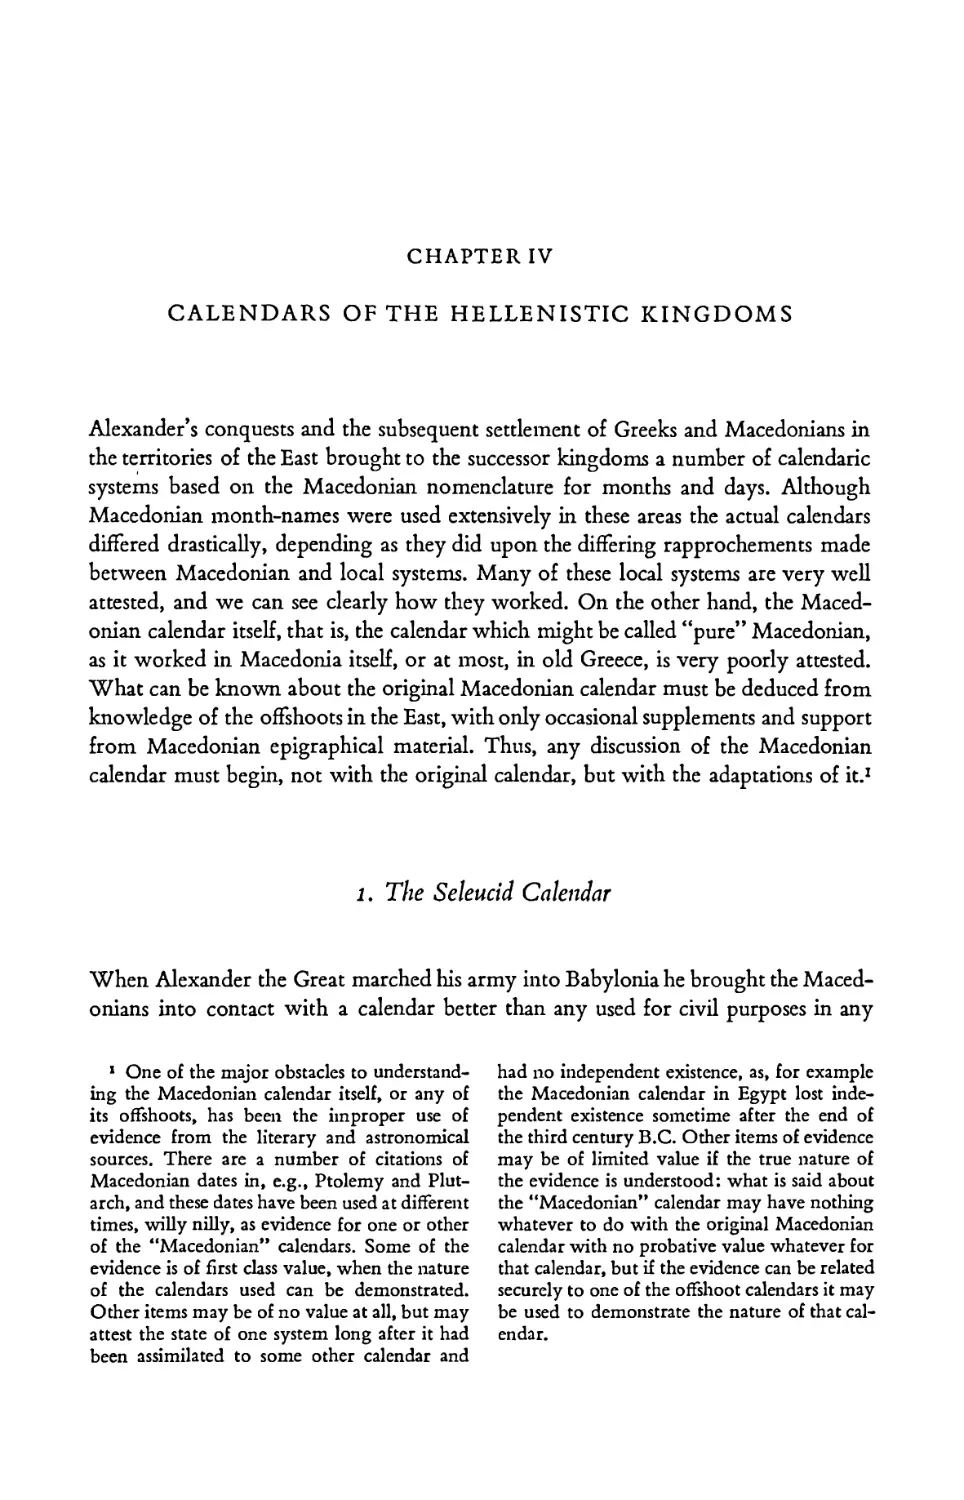 CHAPTER IV. CALENDARS OF THE HELLENISTIC KINGDOMS